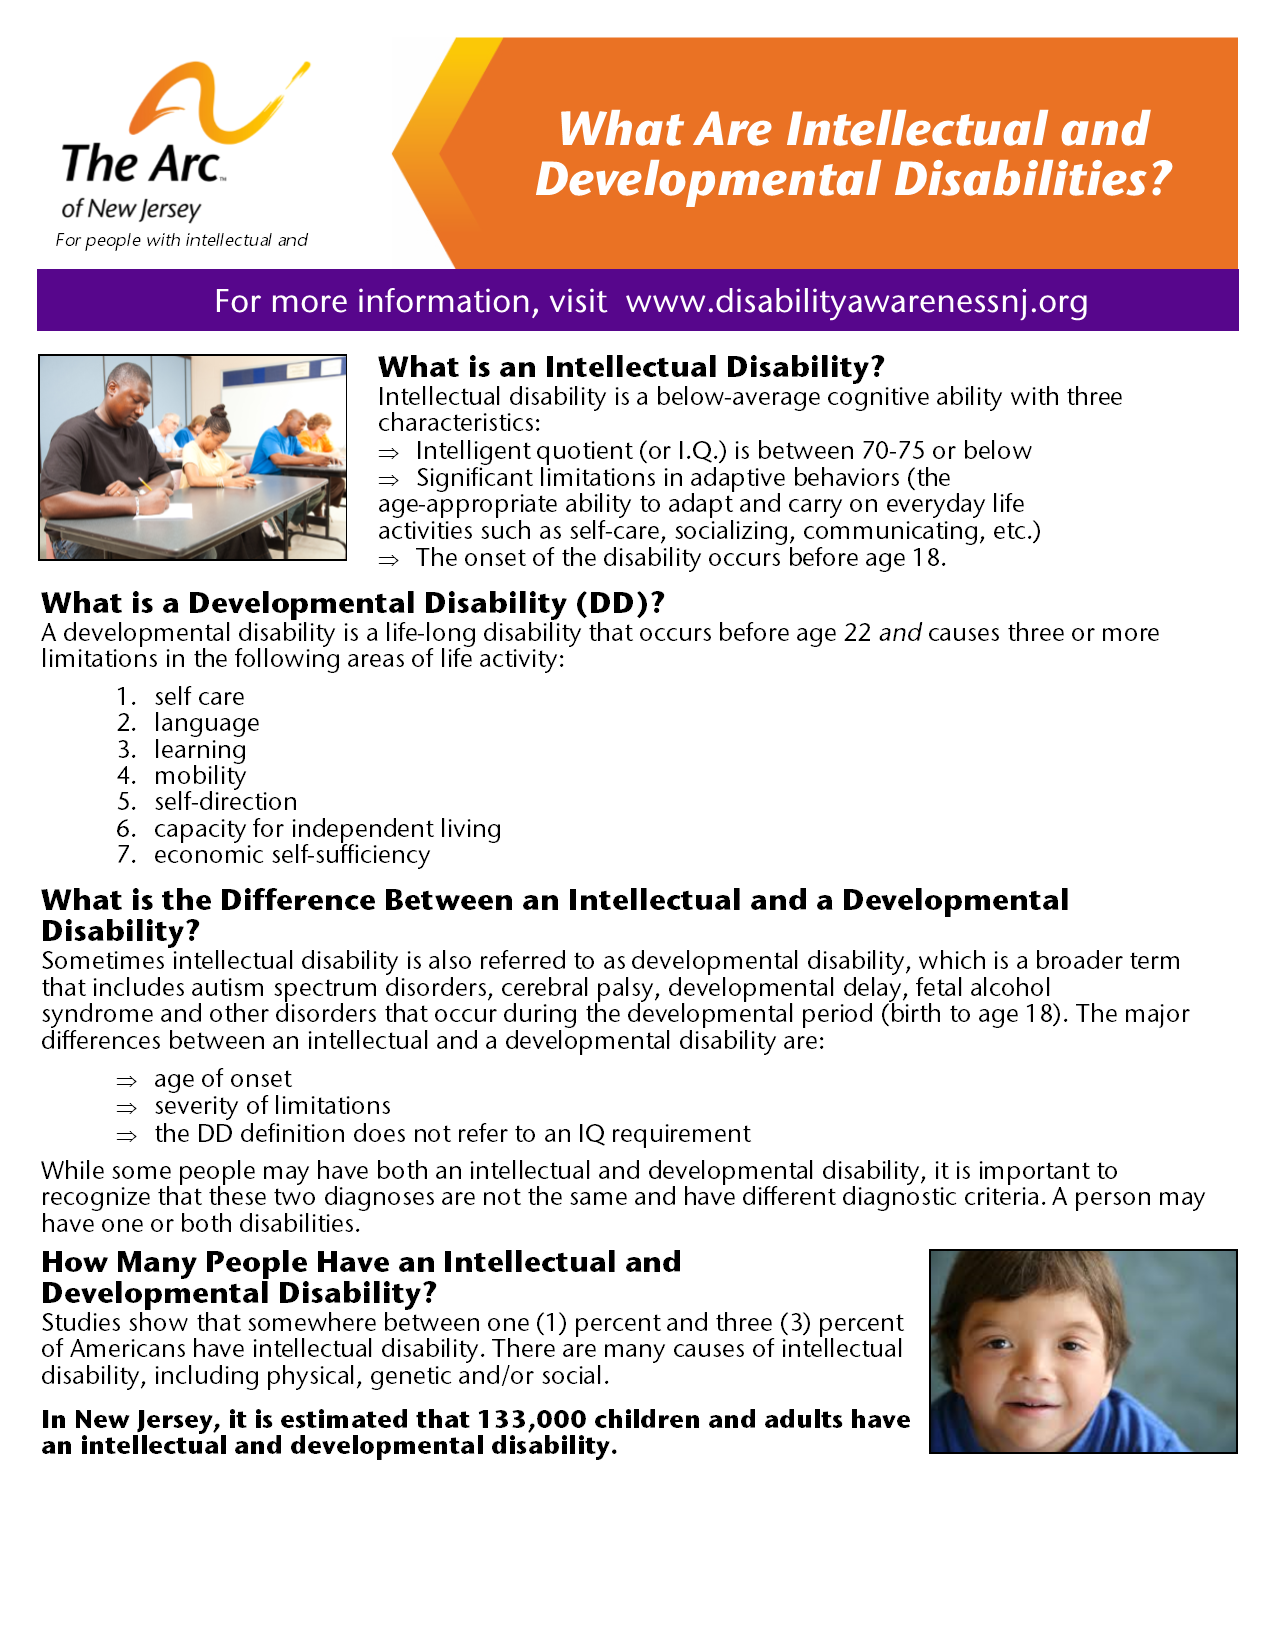 What Are Intellectual and Developmental Disabilities?